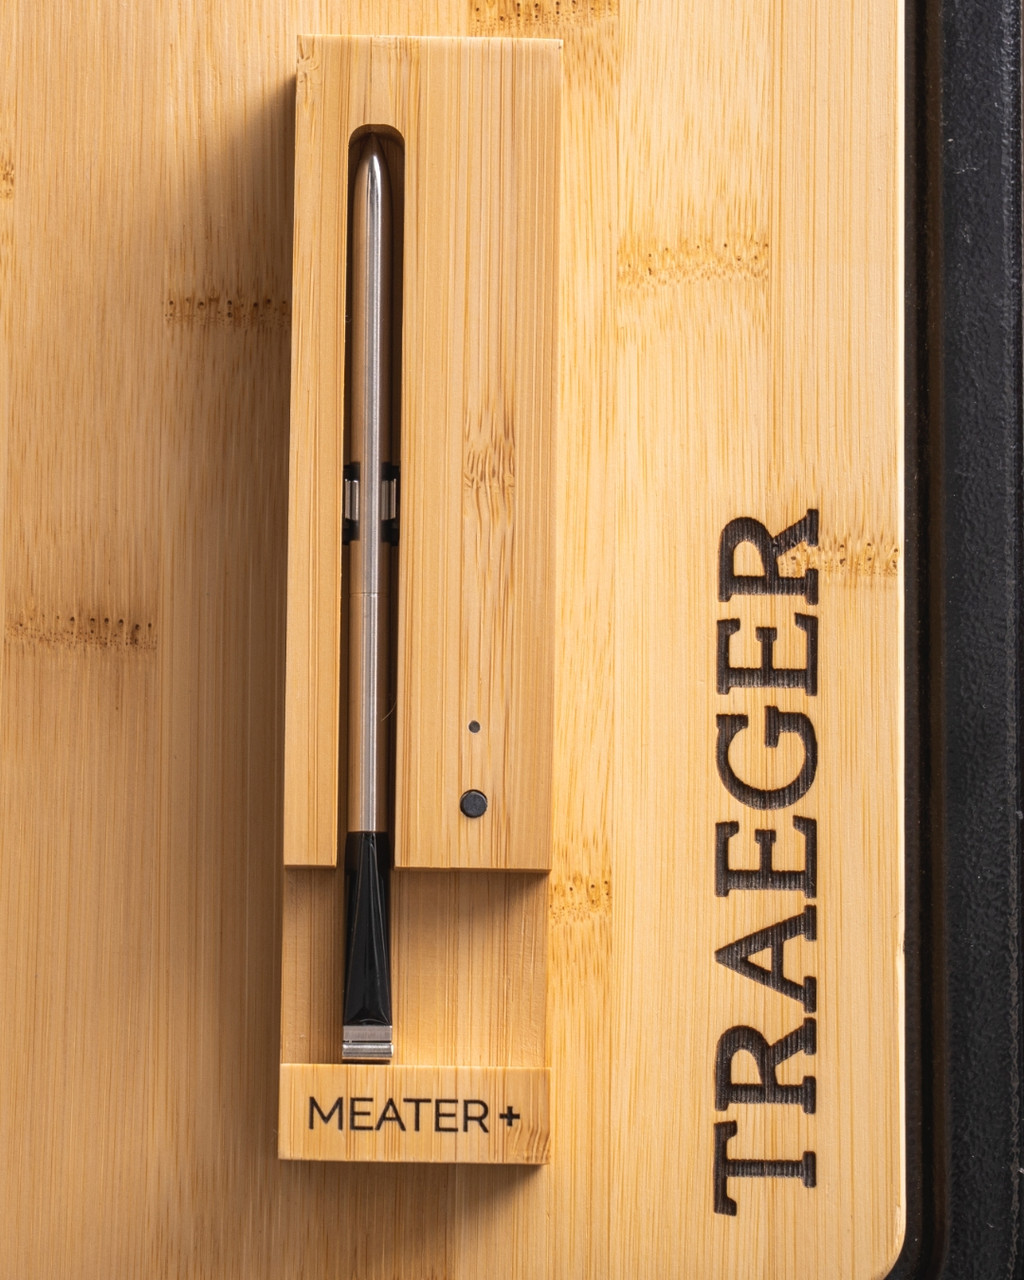 New MEATER+165ft Long Range Smart Wireless Meat Thermometer for